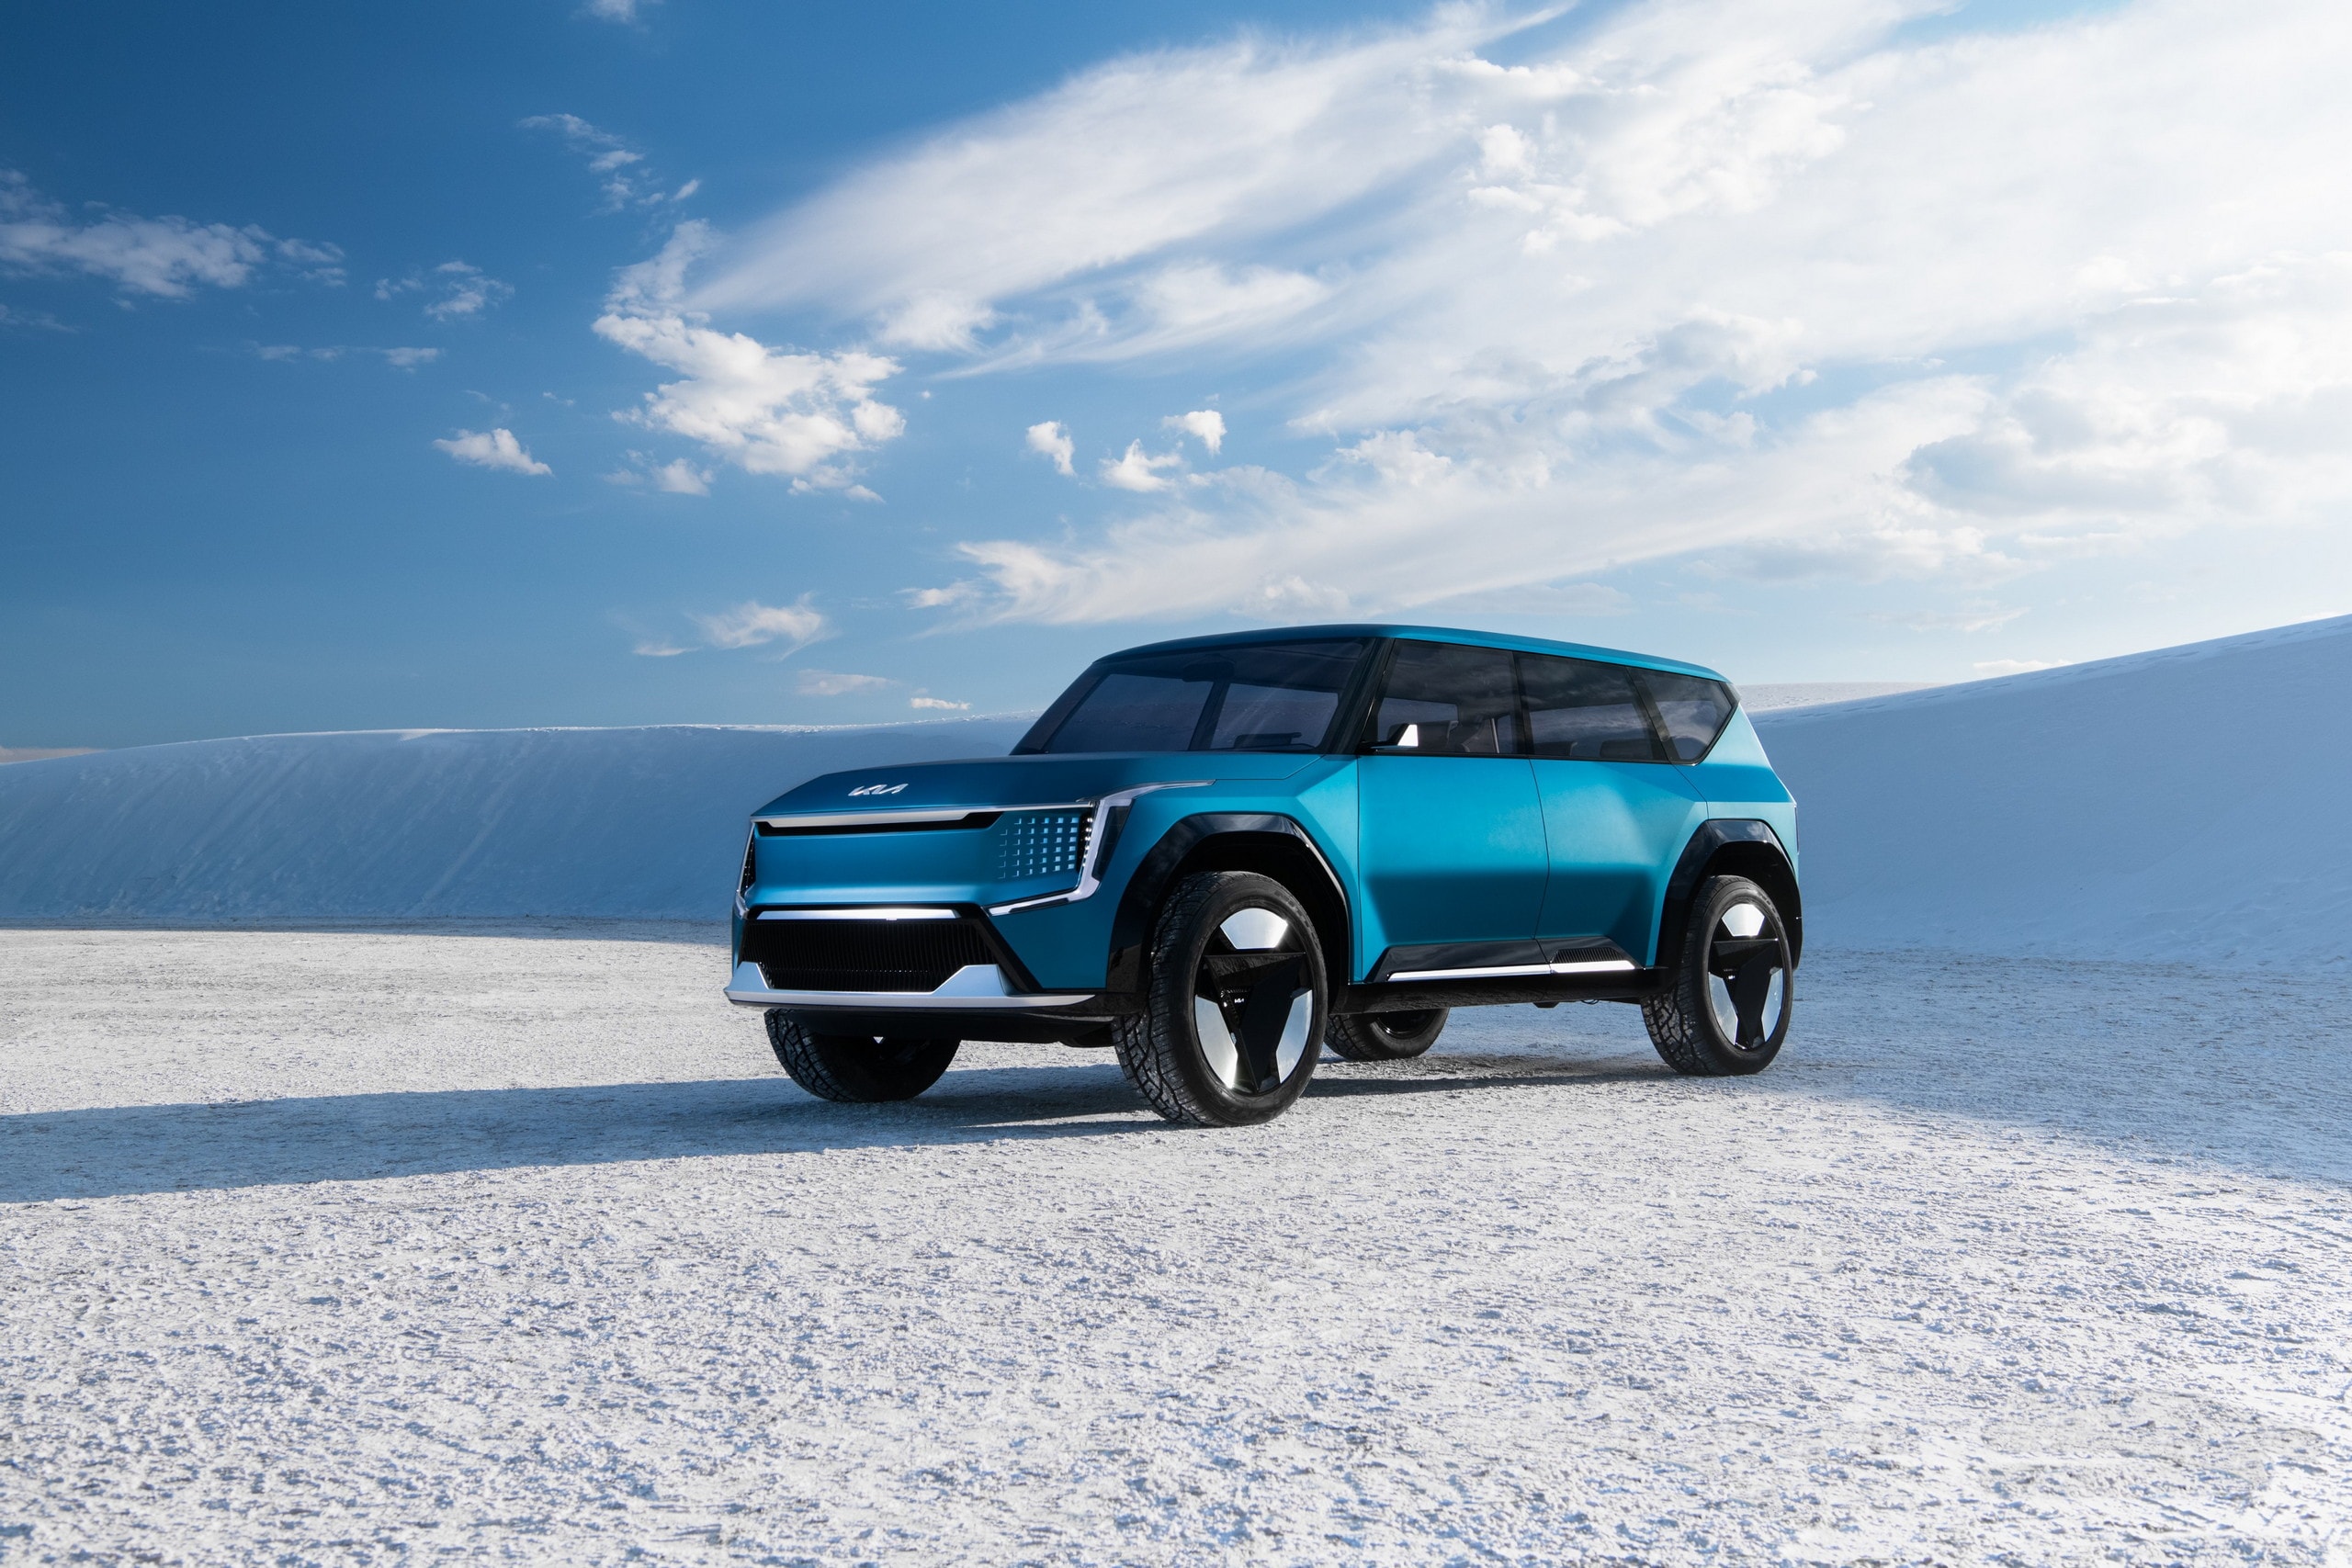 Kia Concept EV9 presents the next fully electric SUV, looks like a